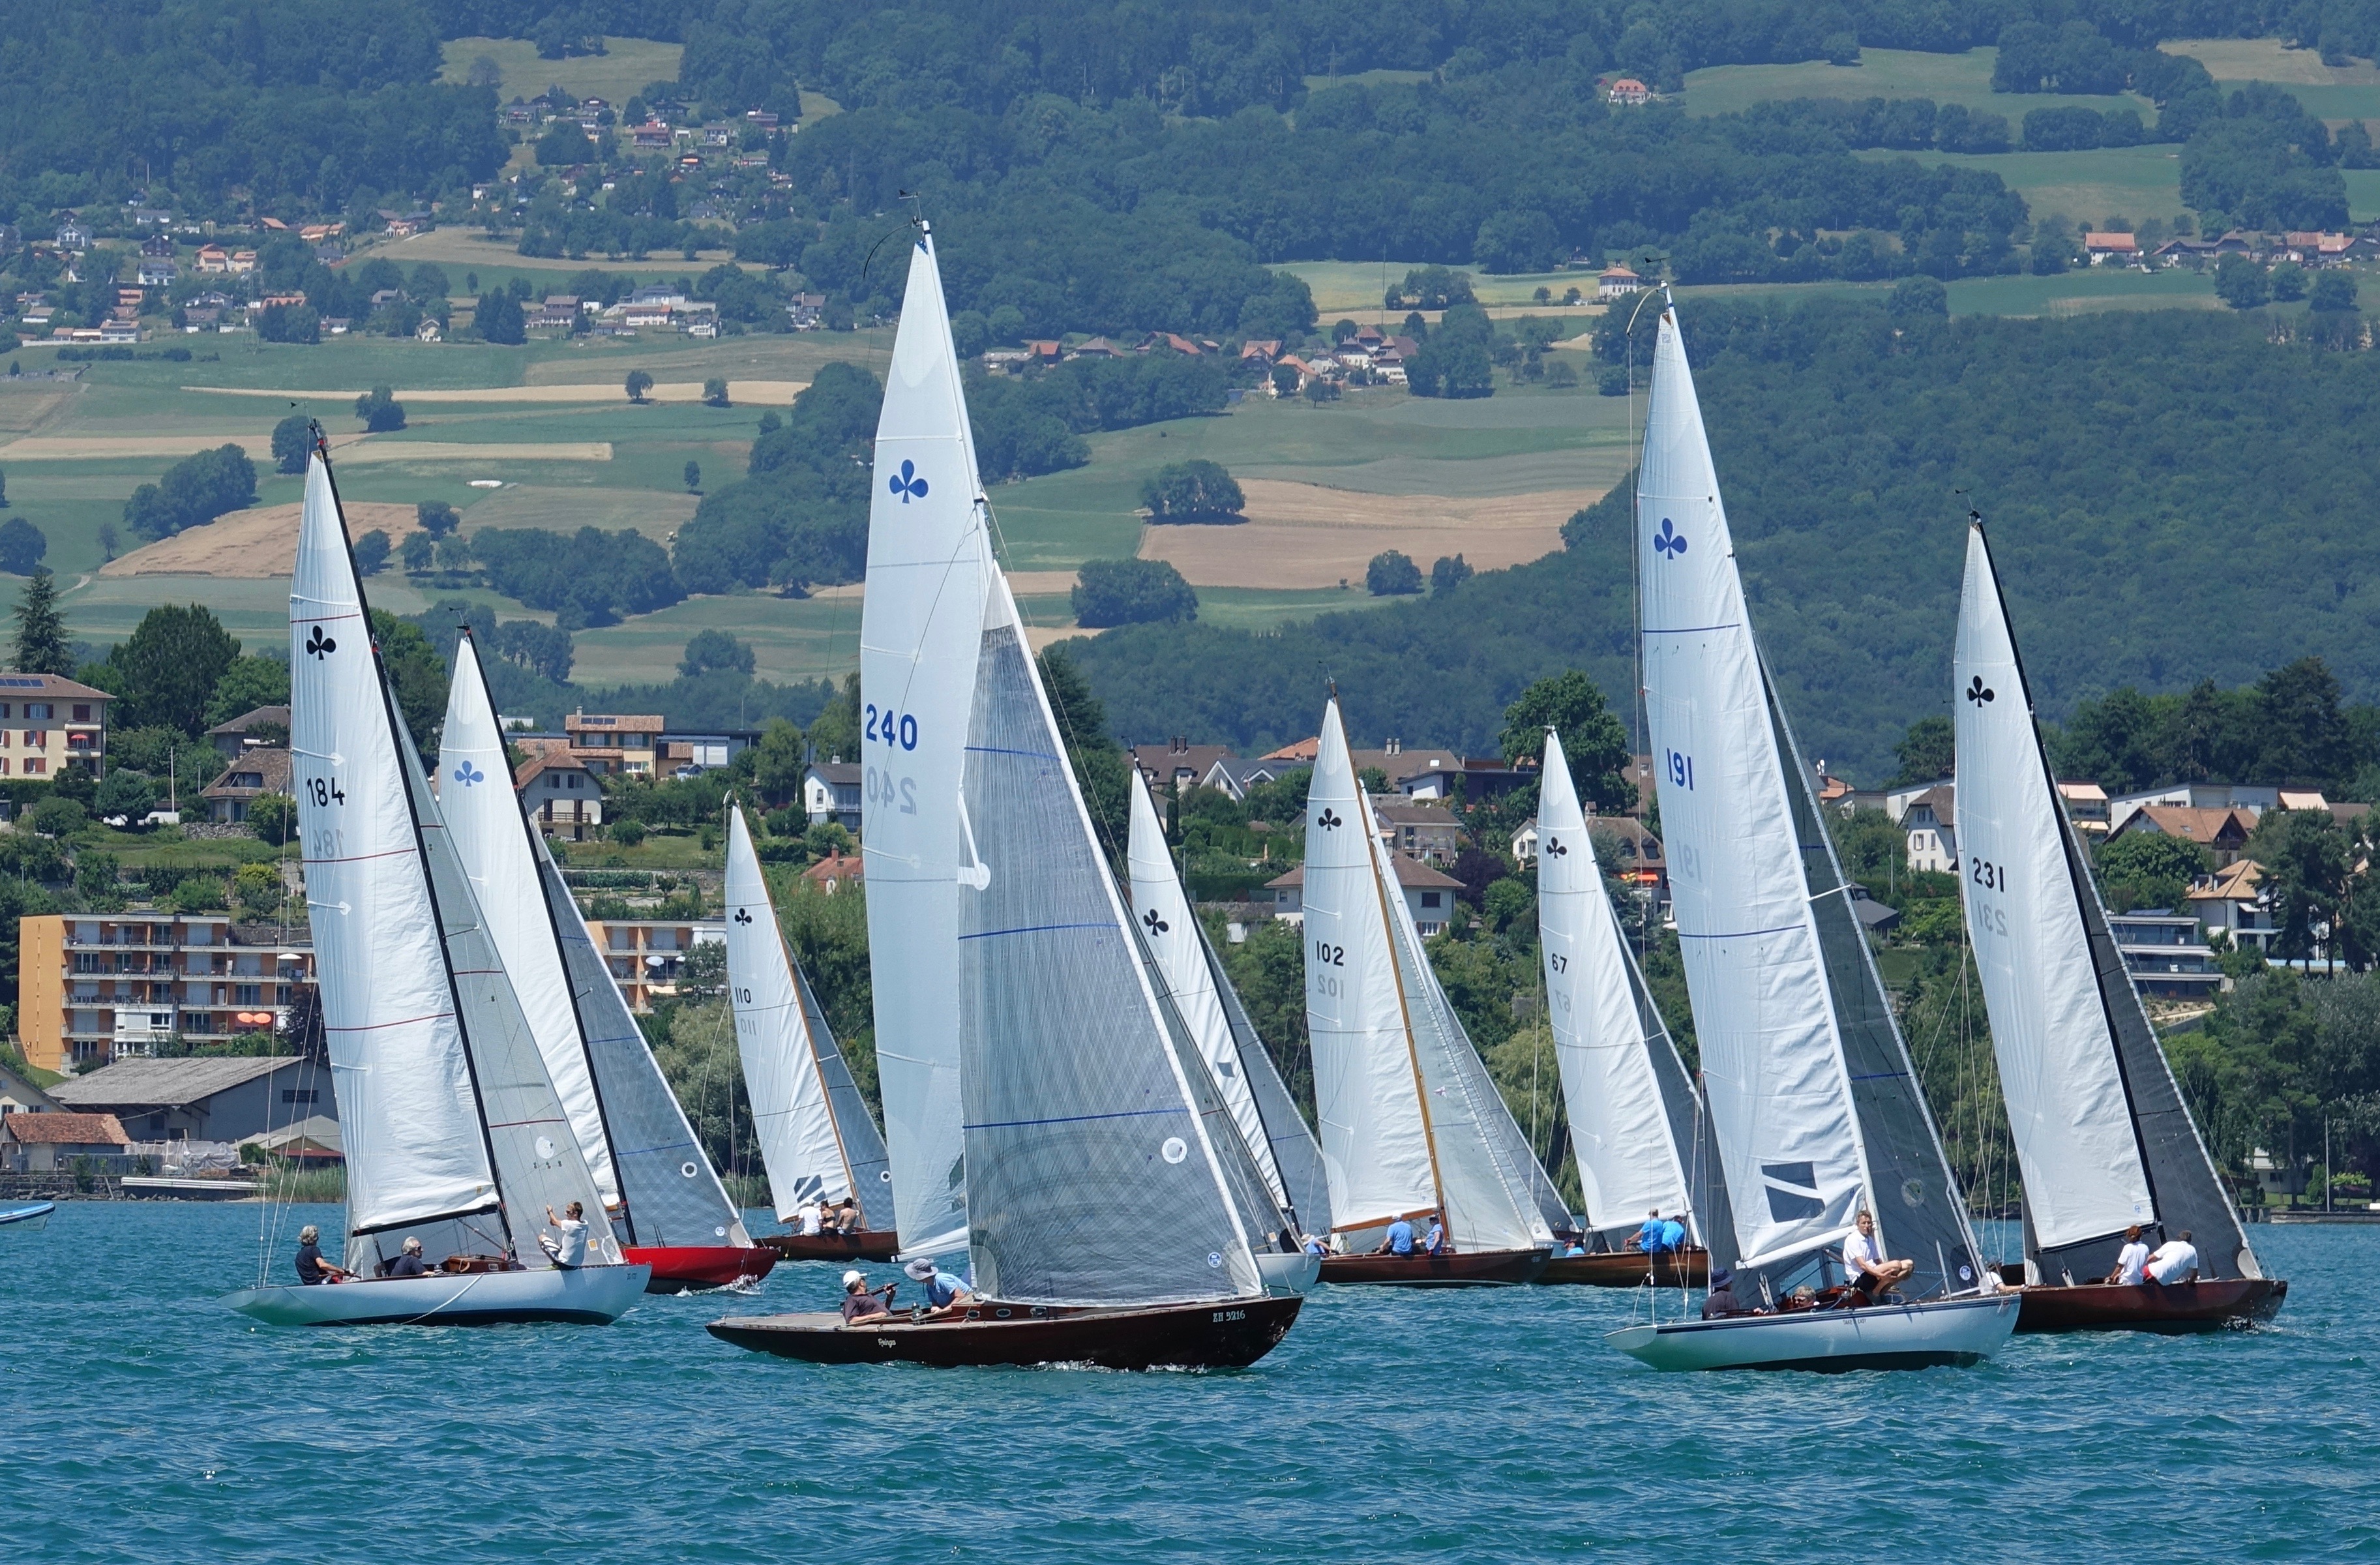  Lacustre  Swiss Championship 2017  CV Grandson  Final results, Hemmeter GER and his team are Champions